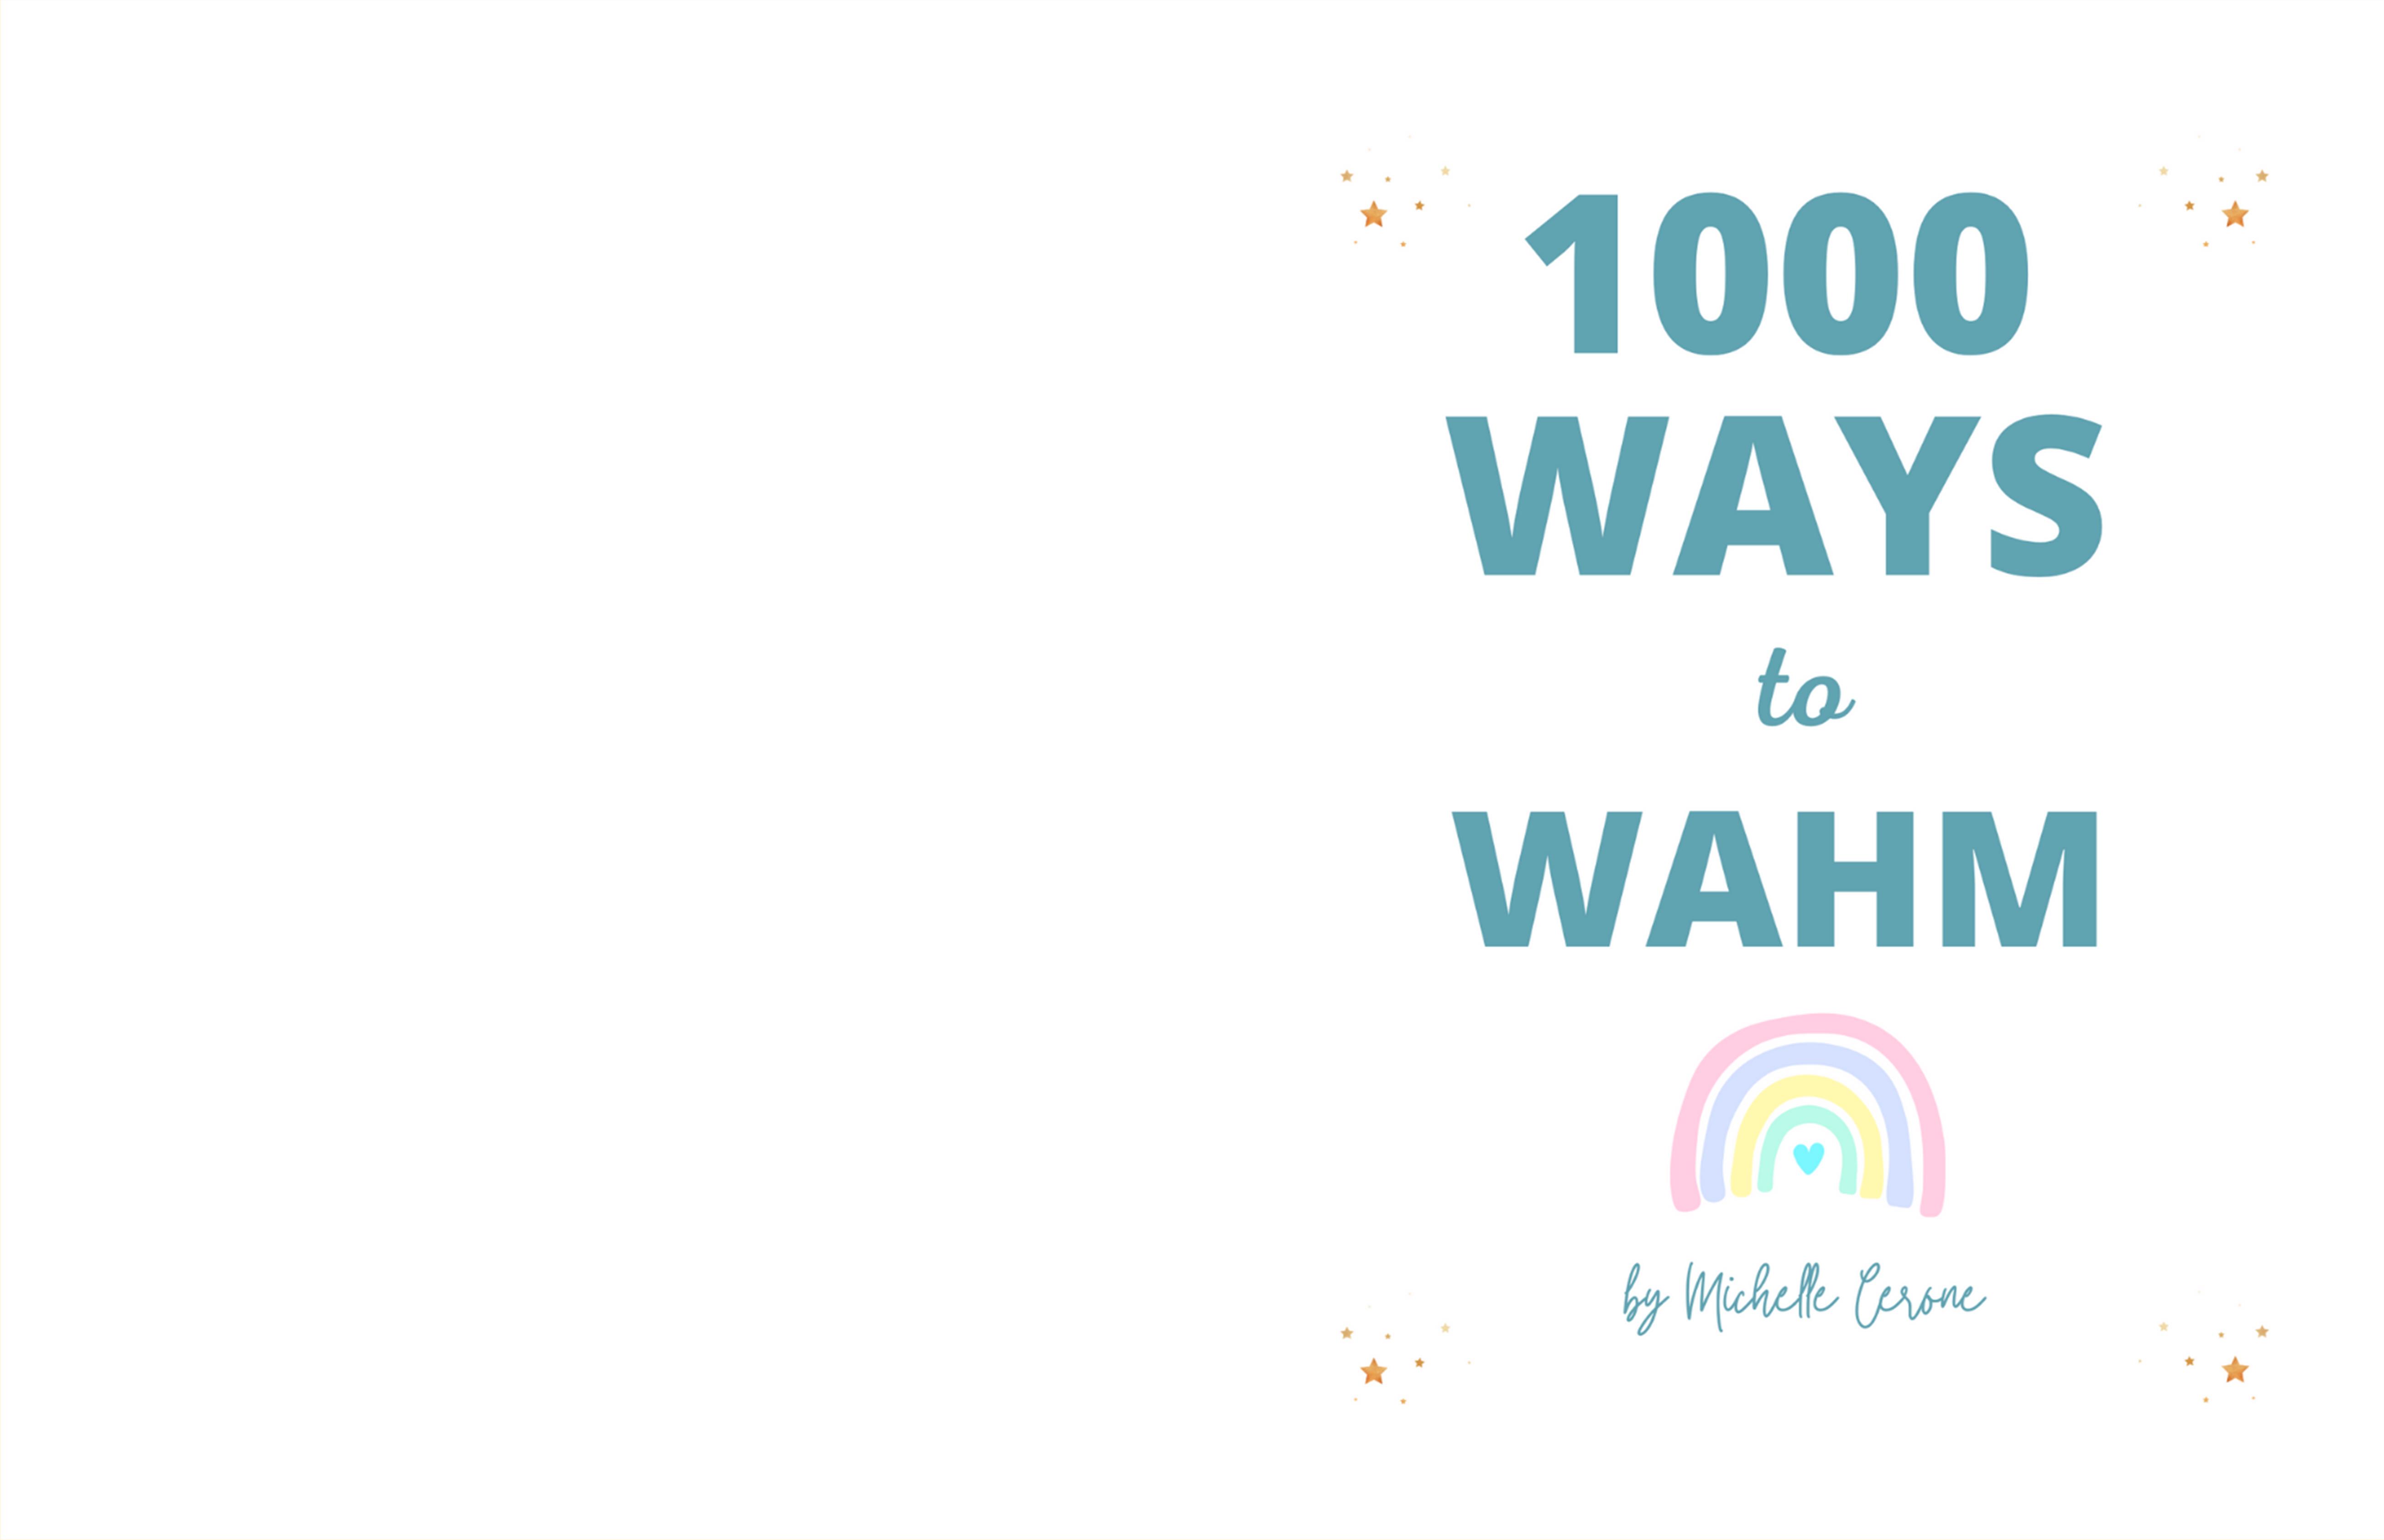 1000 Ways to WAHM cover image